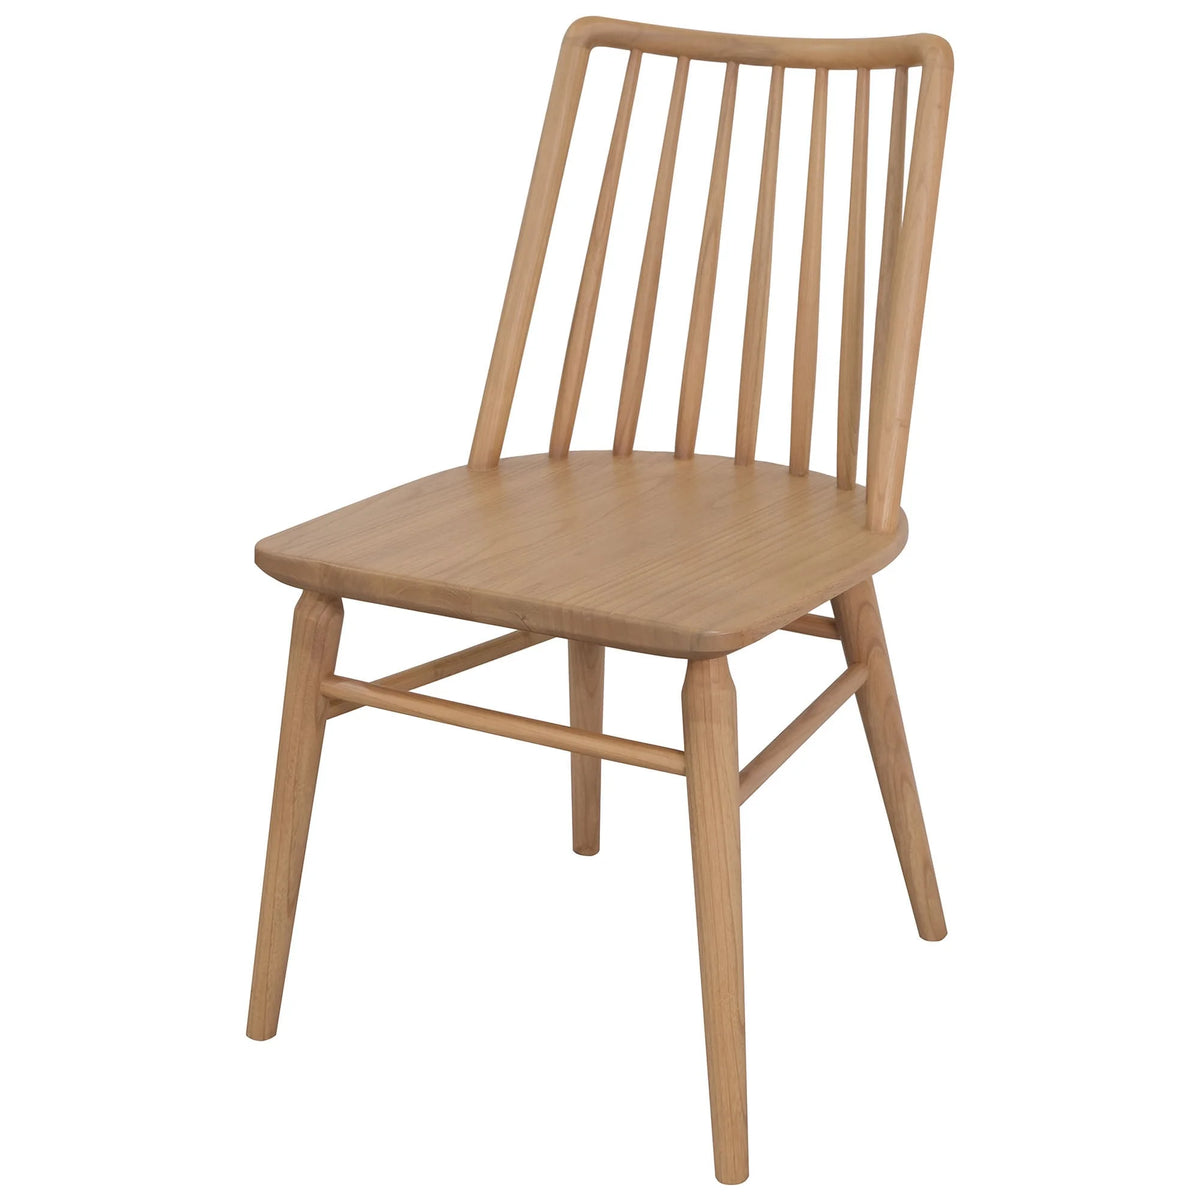 Set of 2 Riviera Solid Oak Dining Chair - Natural